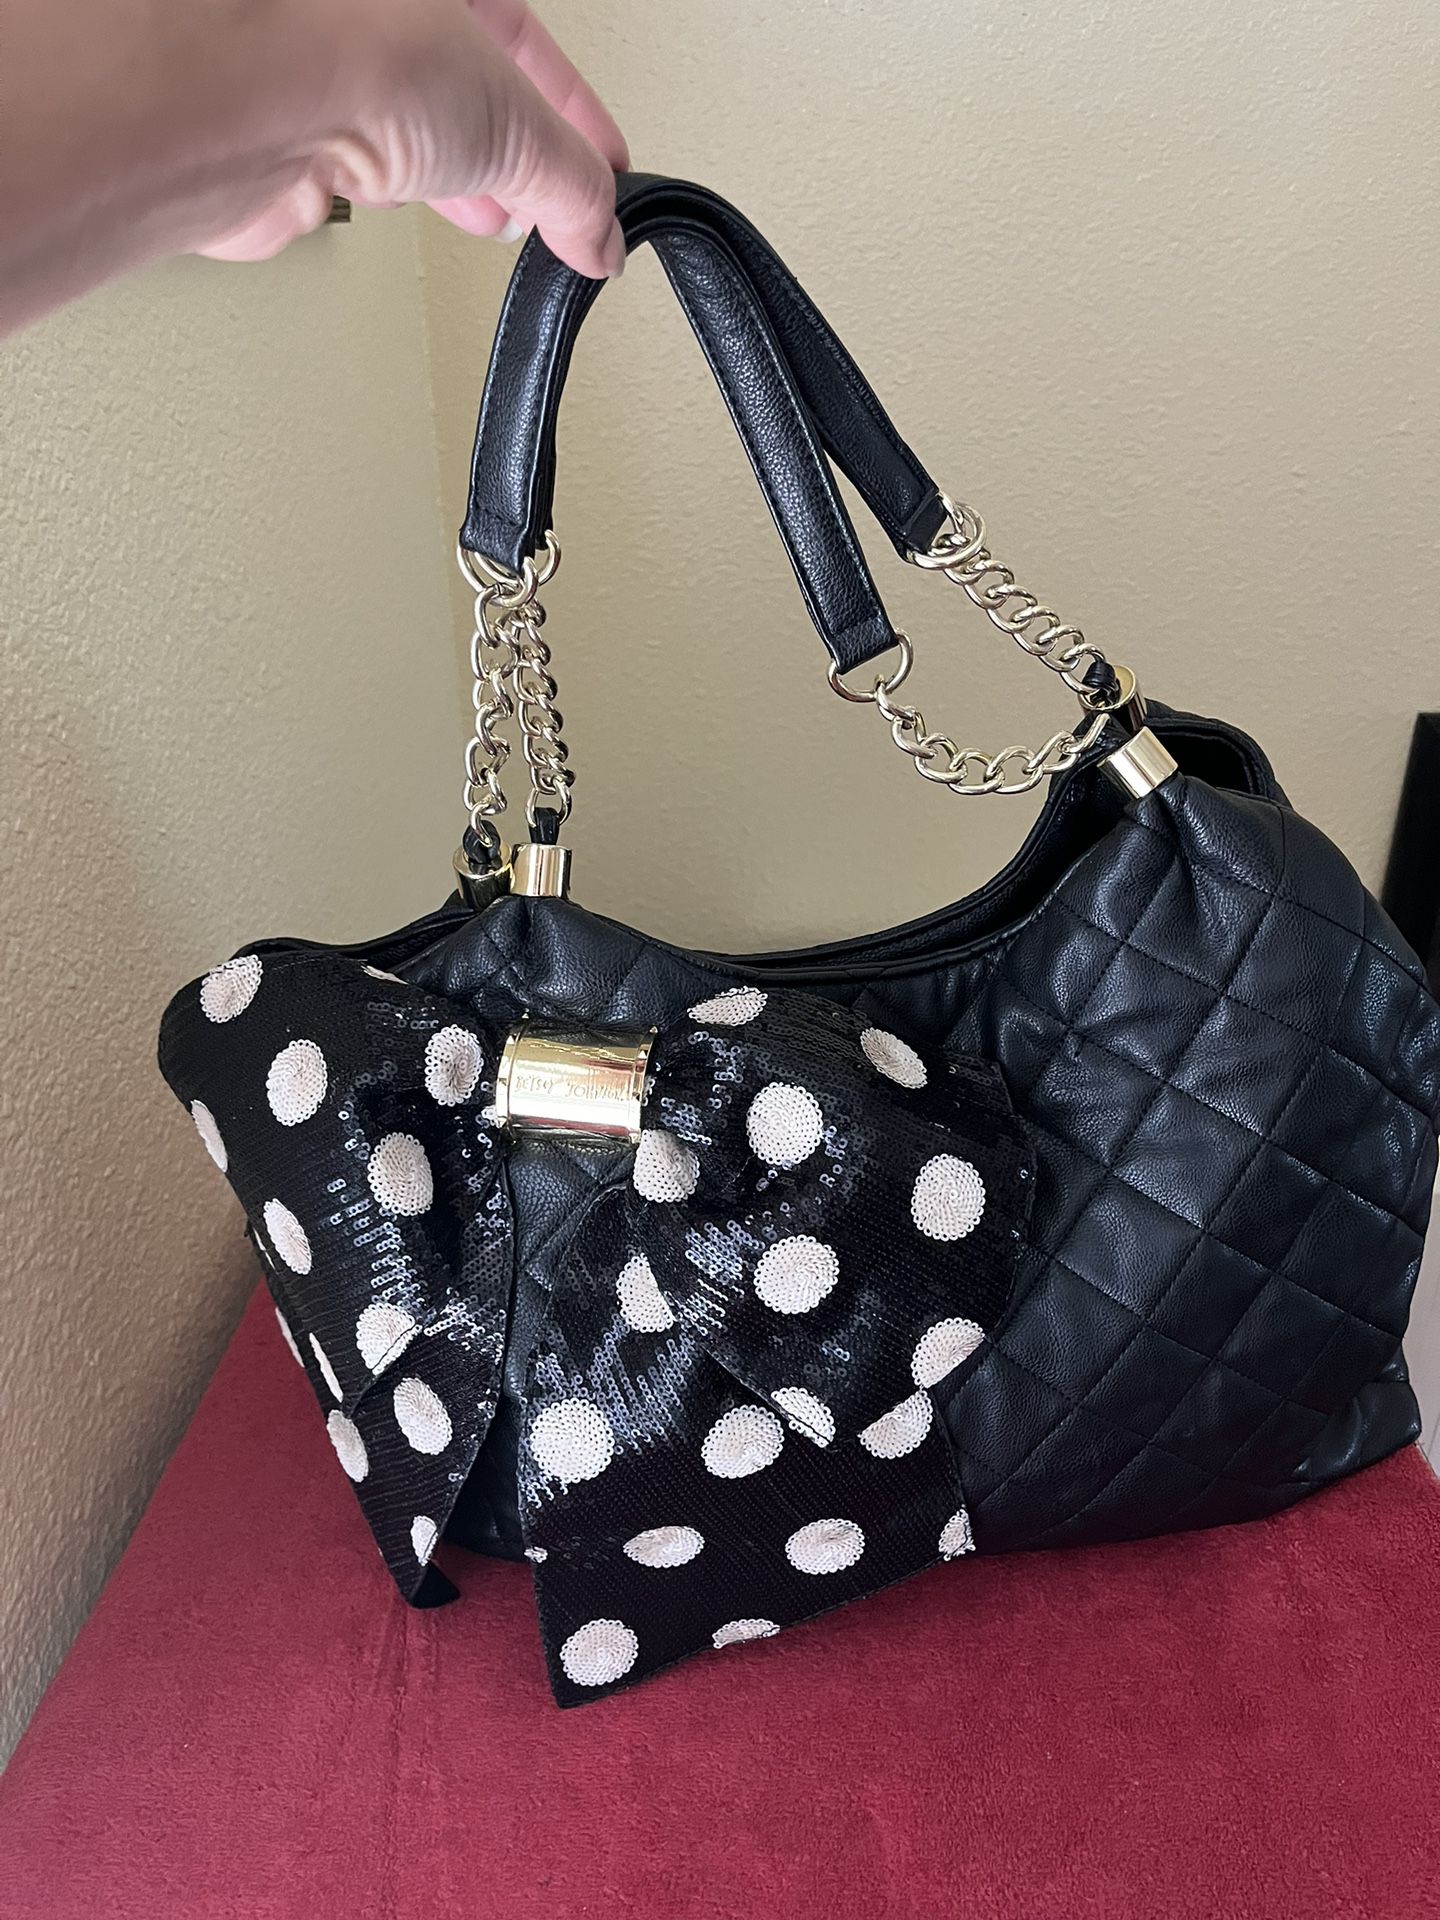 BETSEY JOHNSON Sequin Polka Dot Bow Quilted Black Chain Strap Tote Large Bag